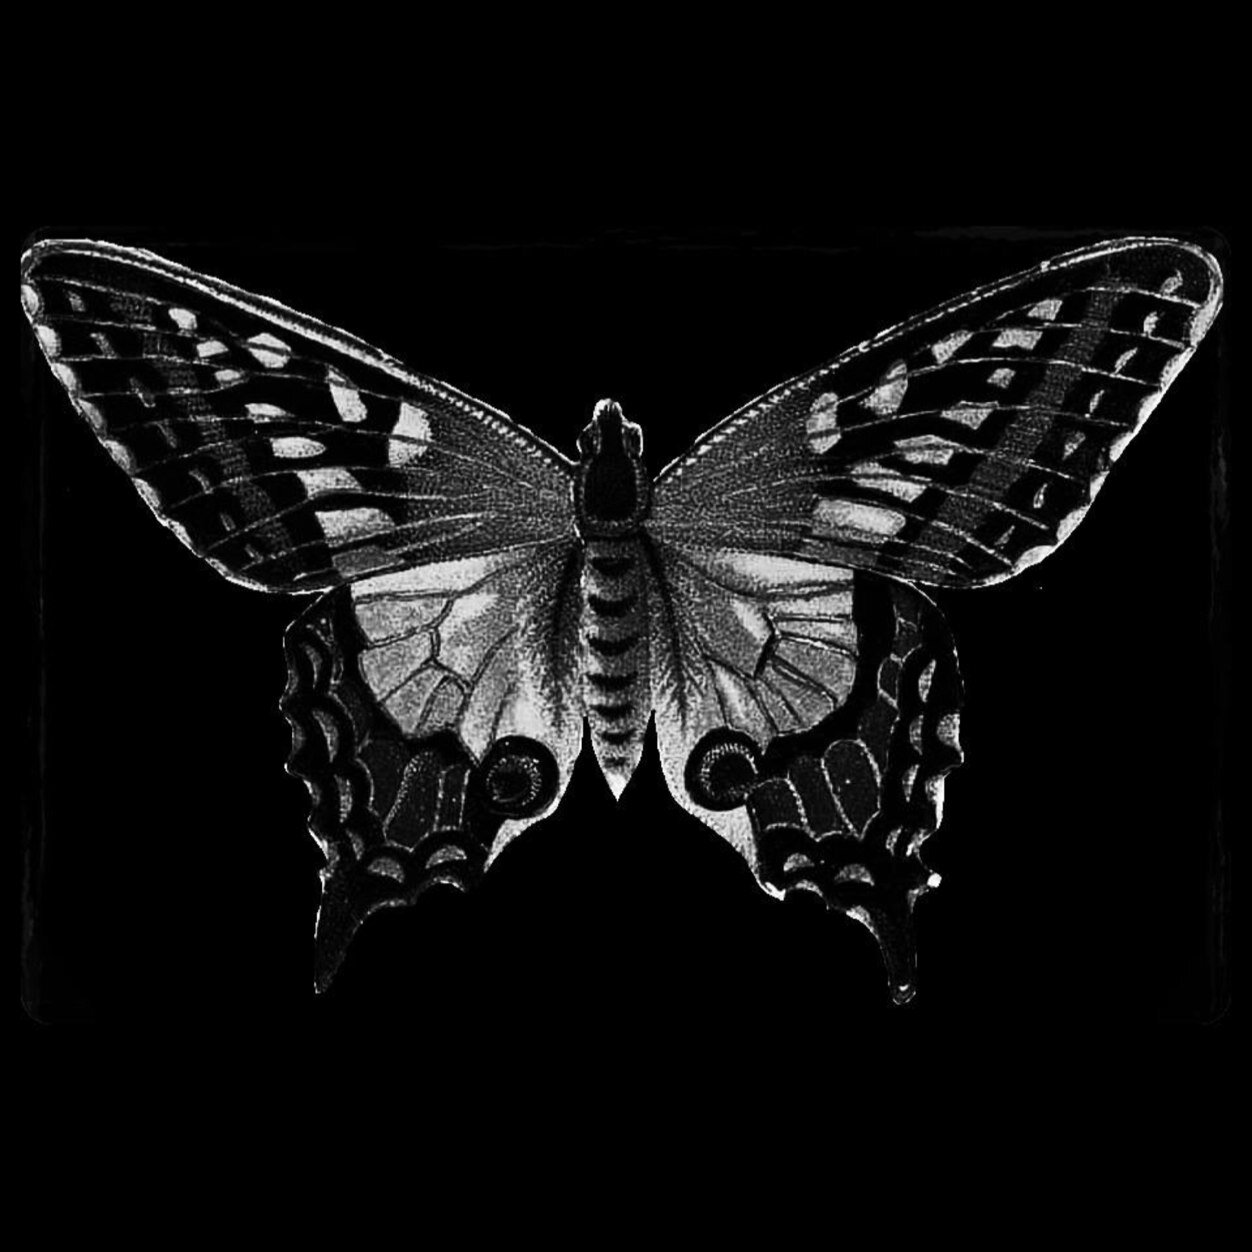 The Black Butterfly.